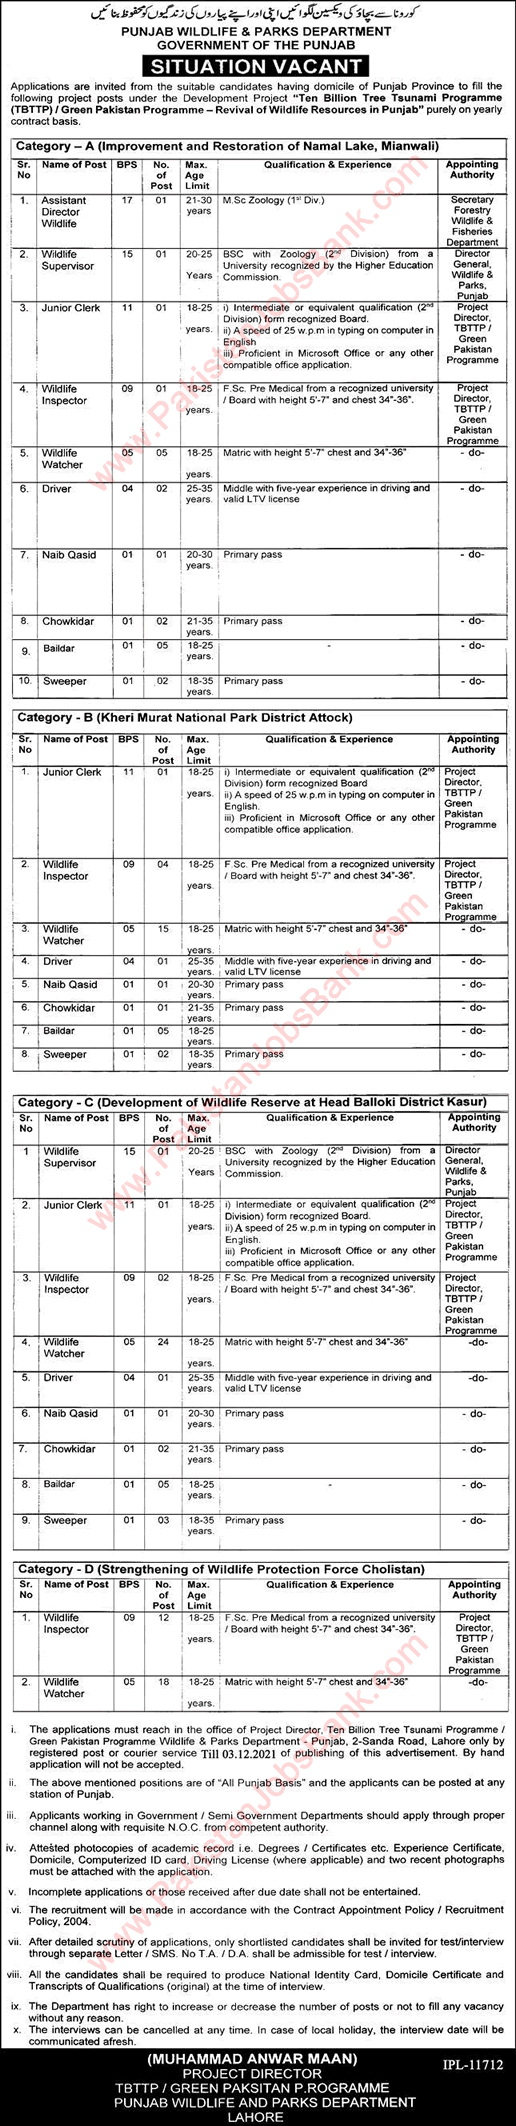 Punjab Wildlife and Parks Department Jobs November 2021 Wildlife Watchers, Inspectors & Others Latest